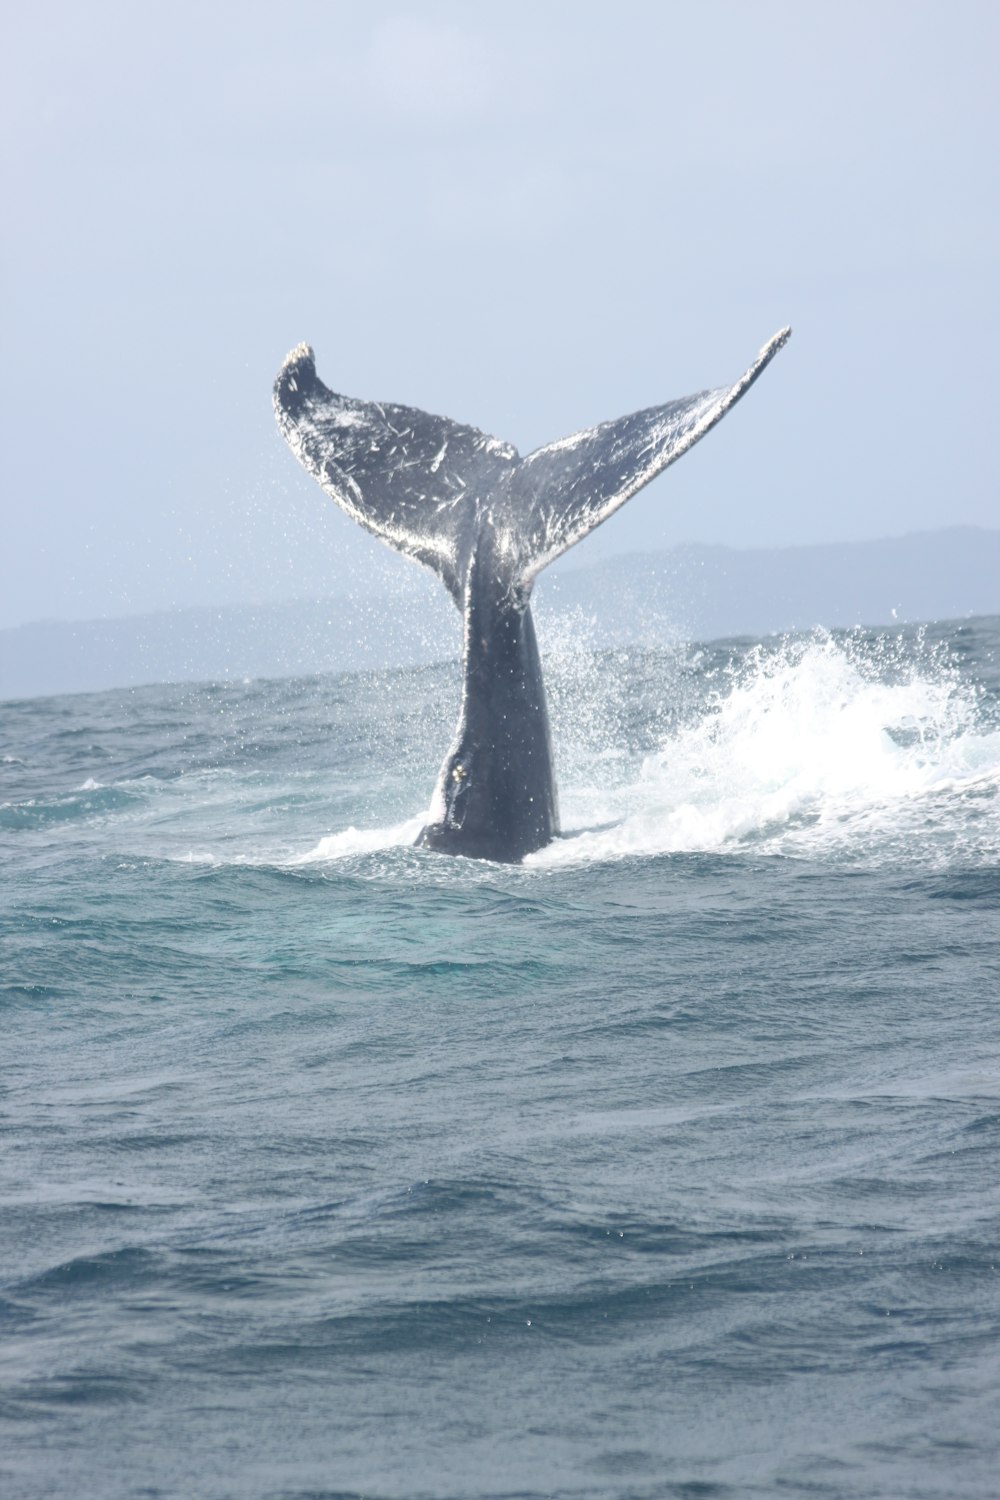 whale tail on body of water during daytime